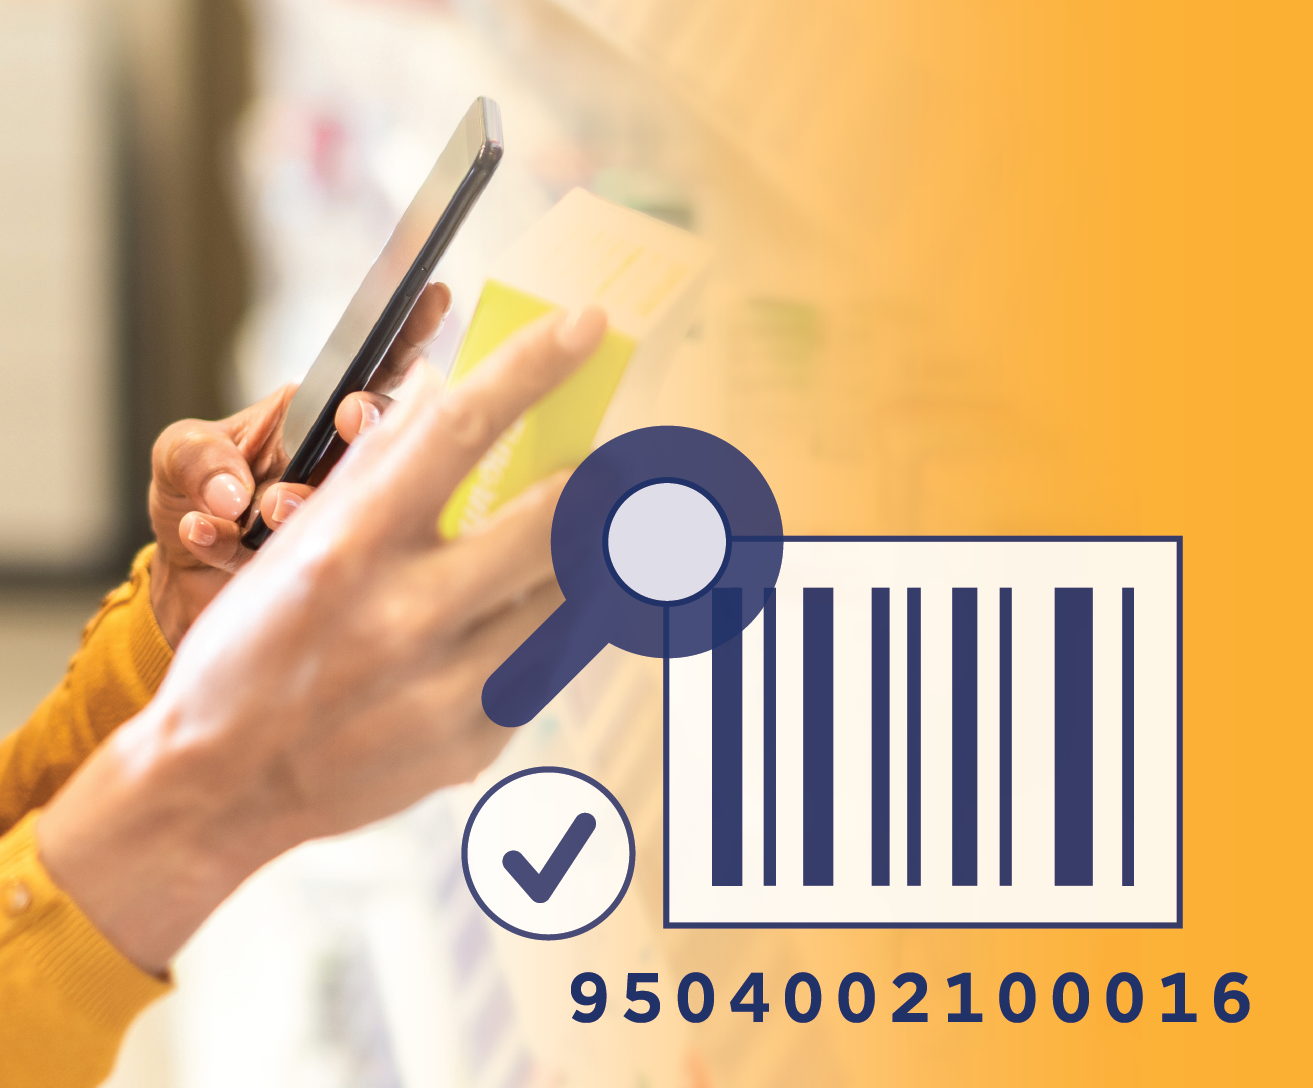 Over 200 million products! The GS1 Registry Platform growth continues – businesses, service providers and governments can leverage Verified by GS1 to check the identity of over 200 million products